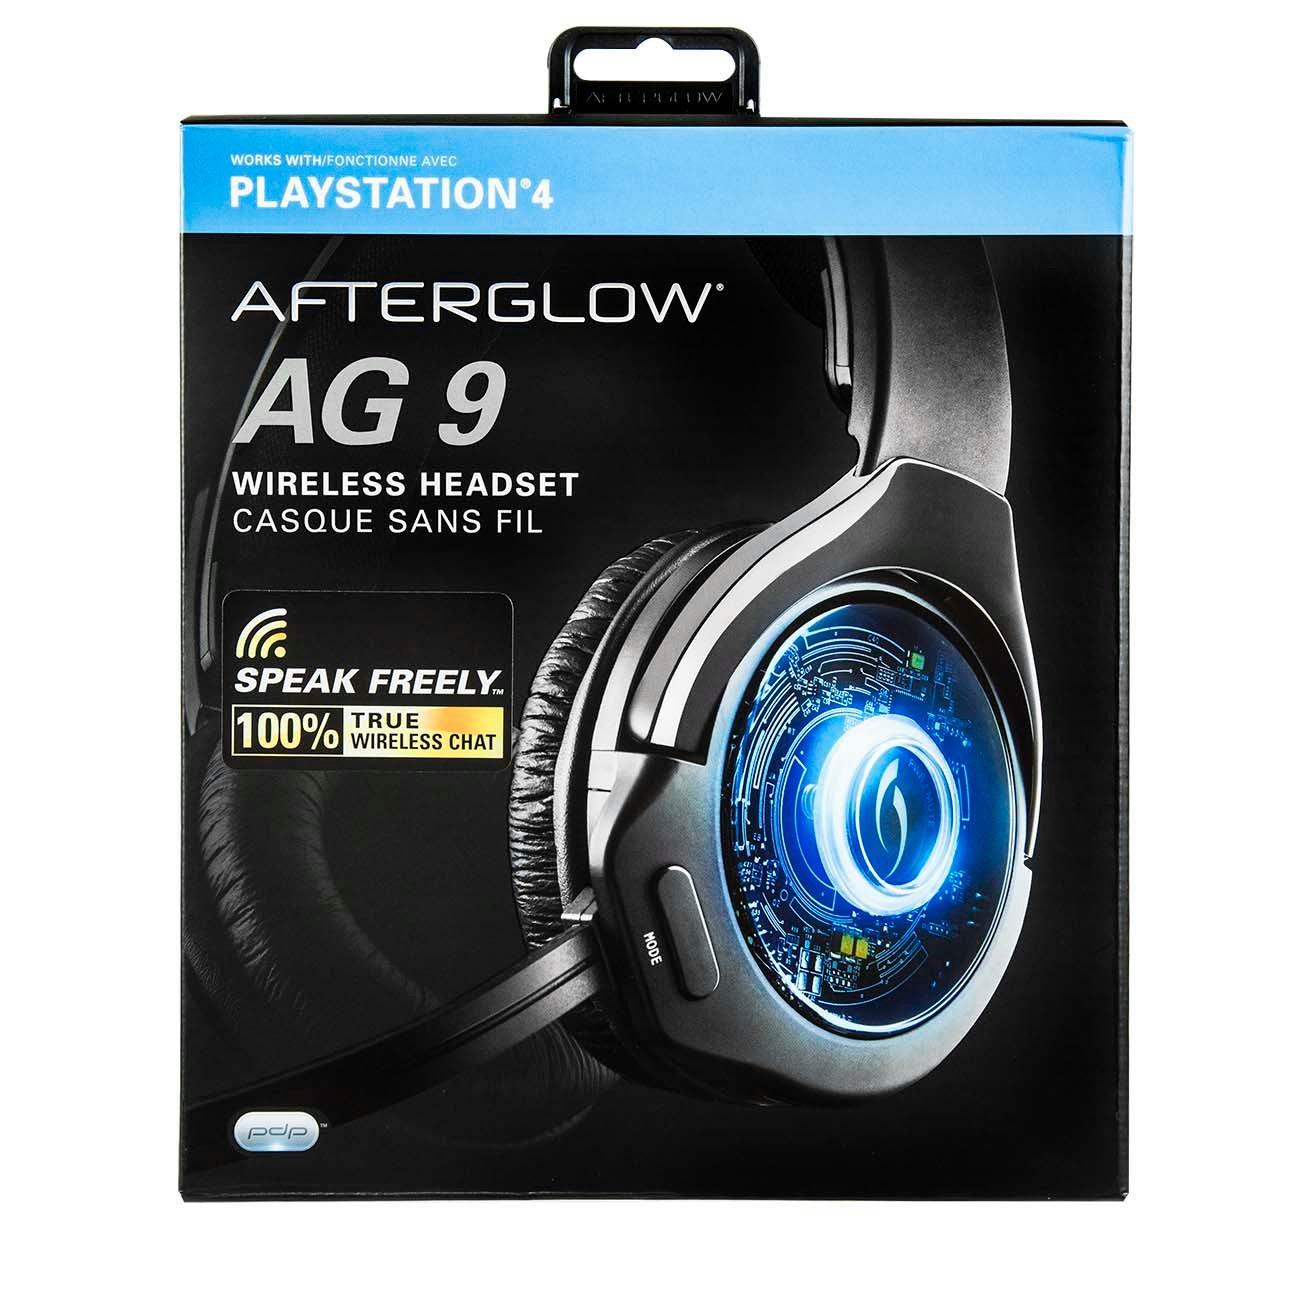 playstation 4 afterglow ag 9